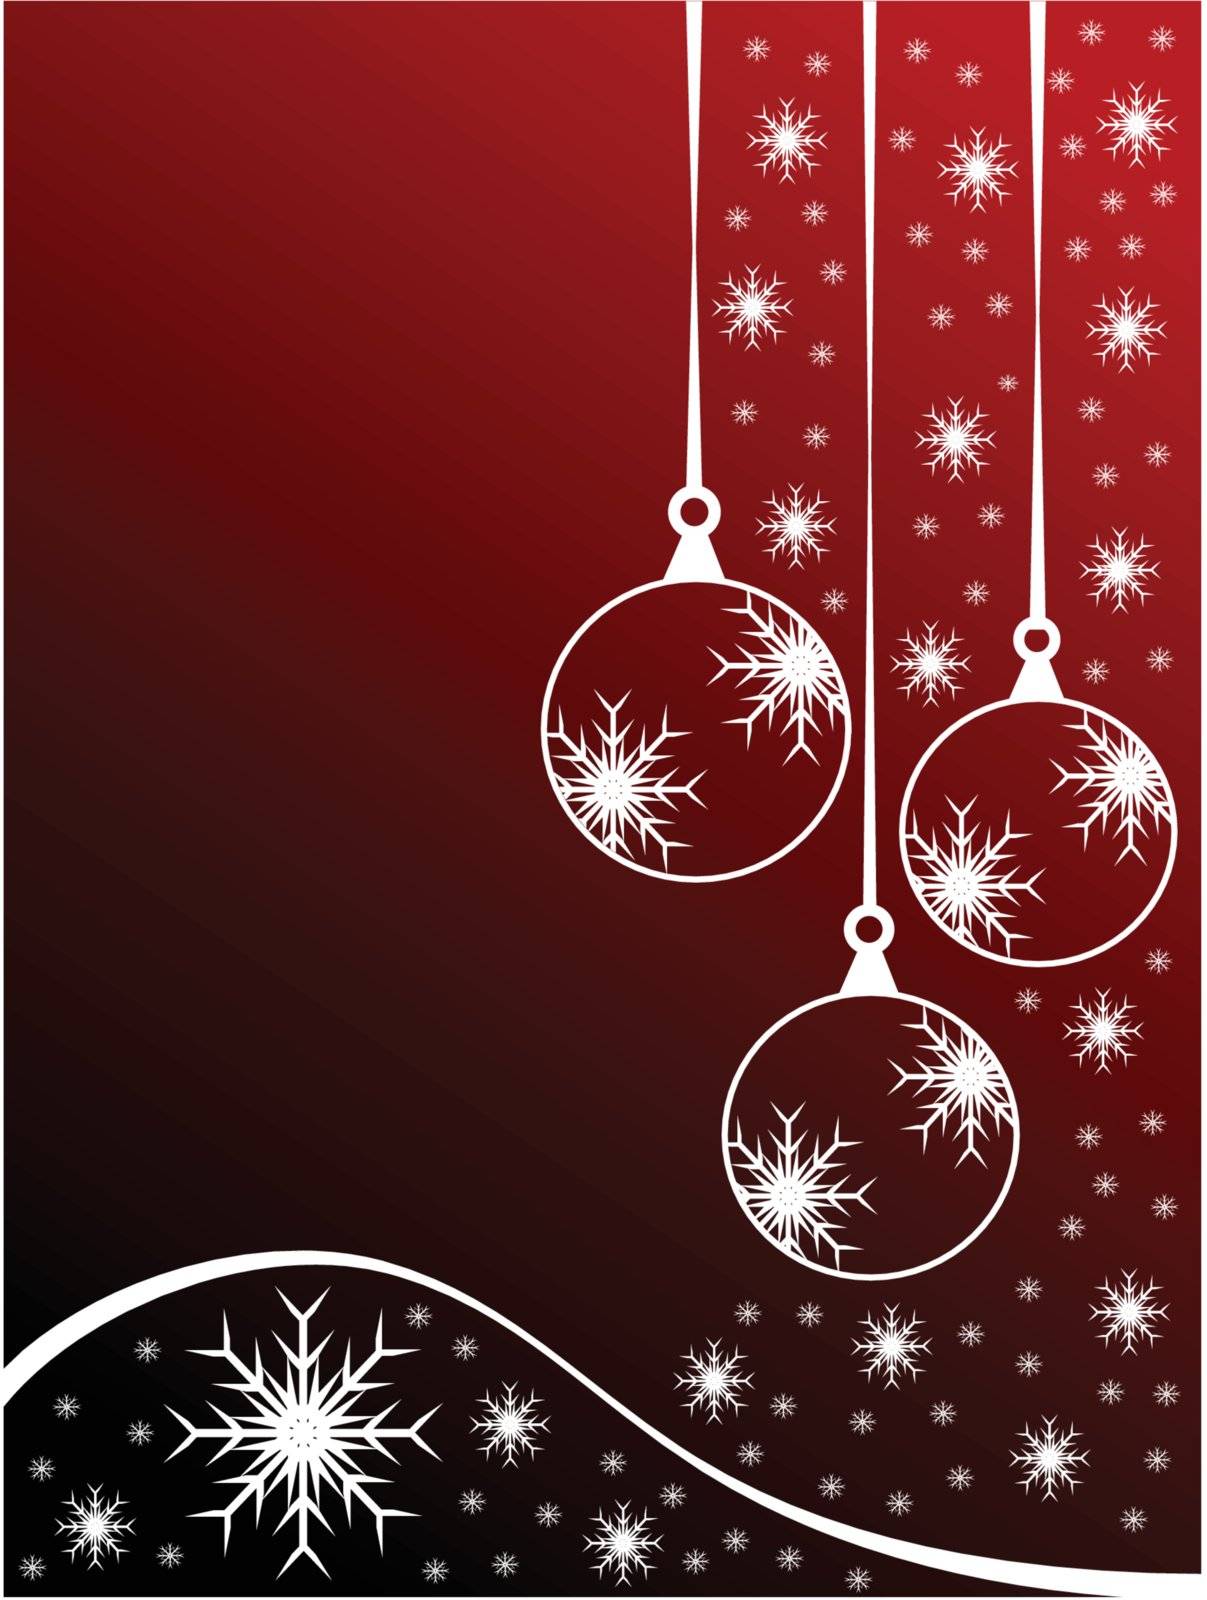 An abstract Christmas vector illustration by mhprice